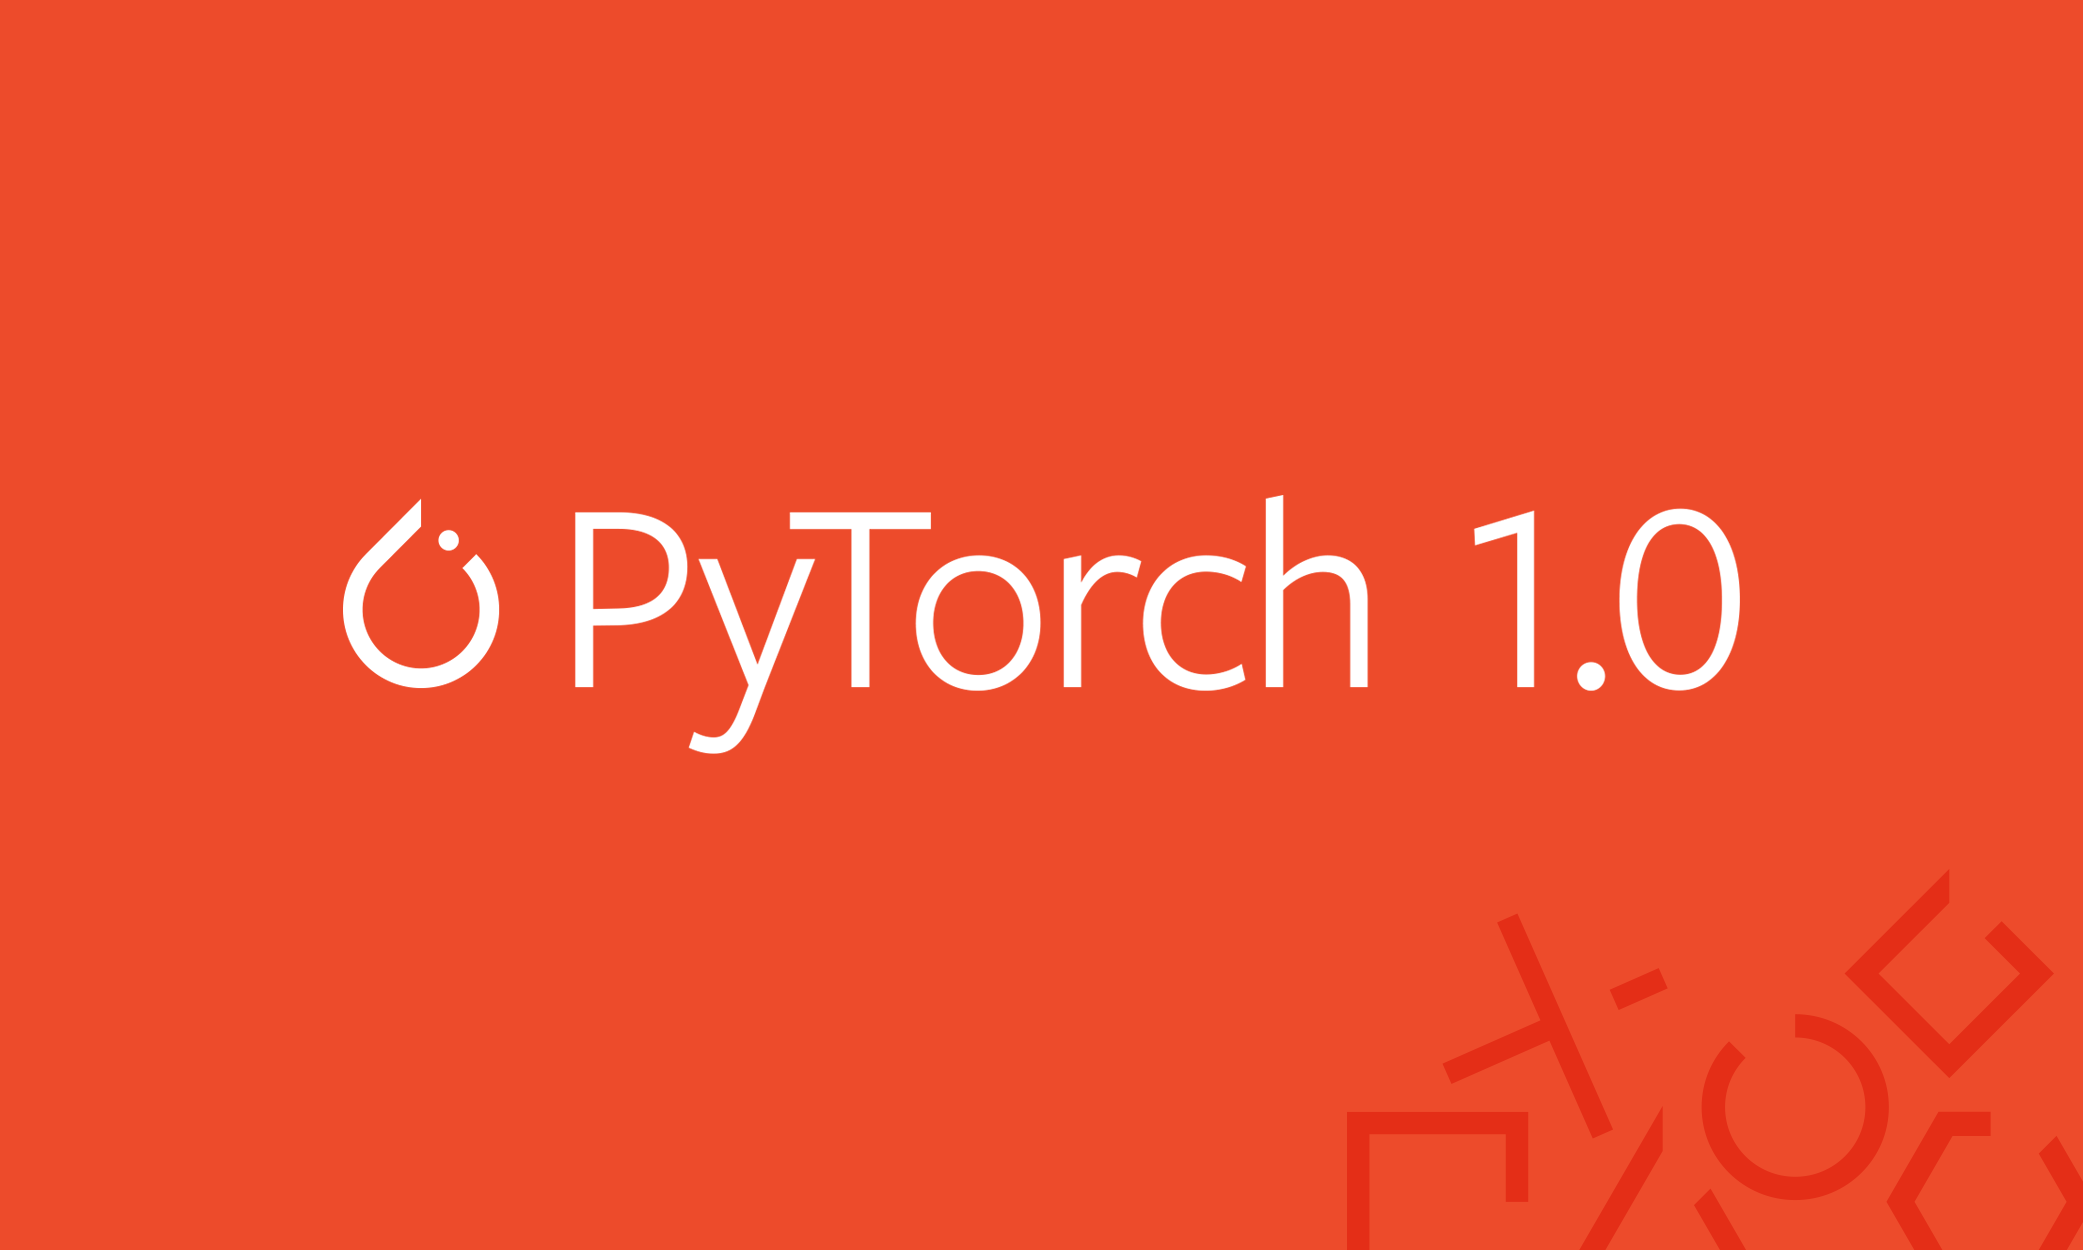 PyTorch 1.0 Release